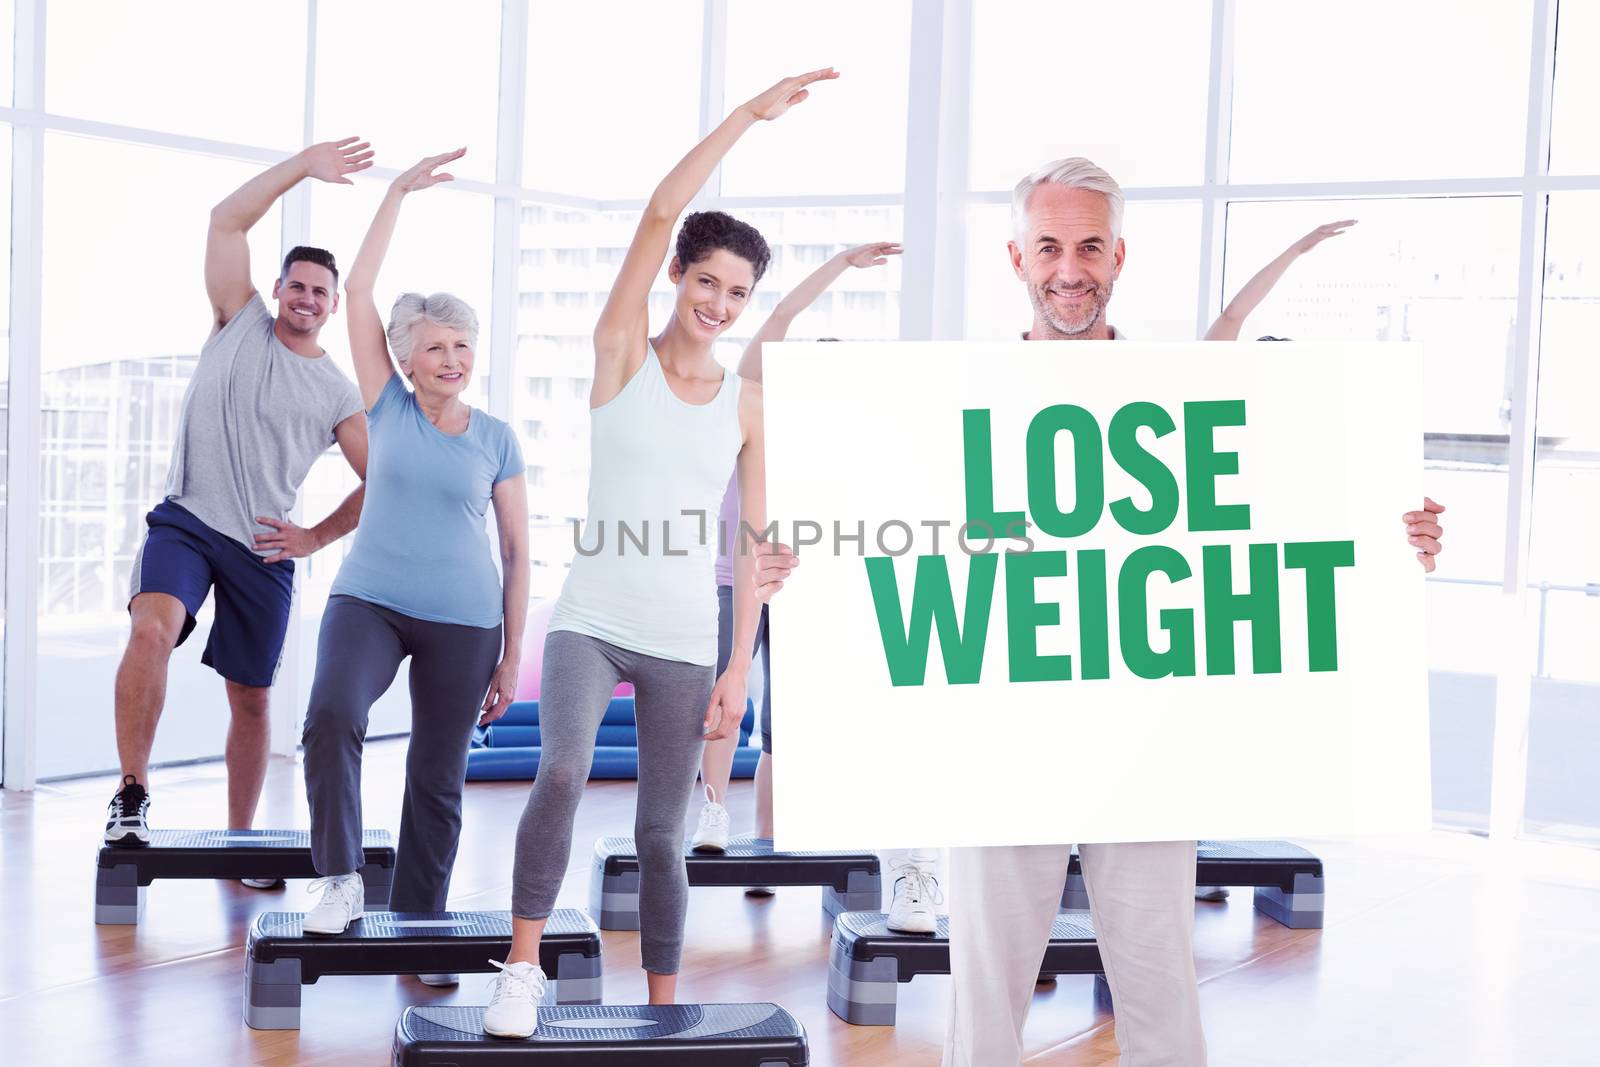 Smiling man showing large poster against lose weight